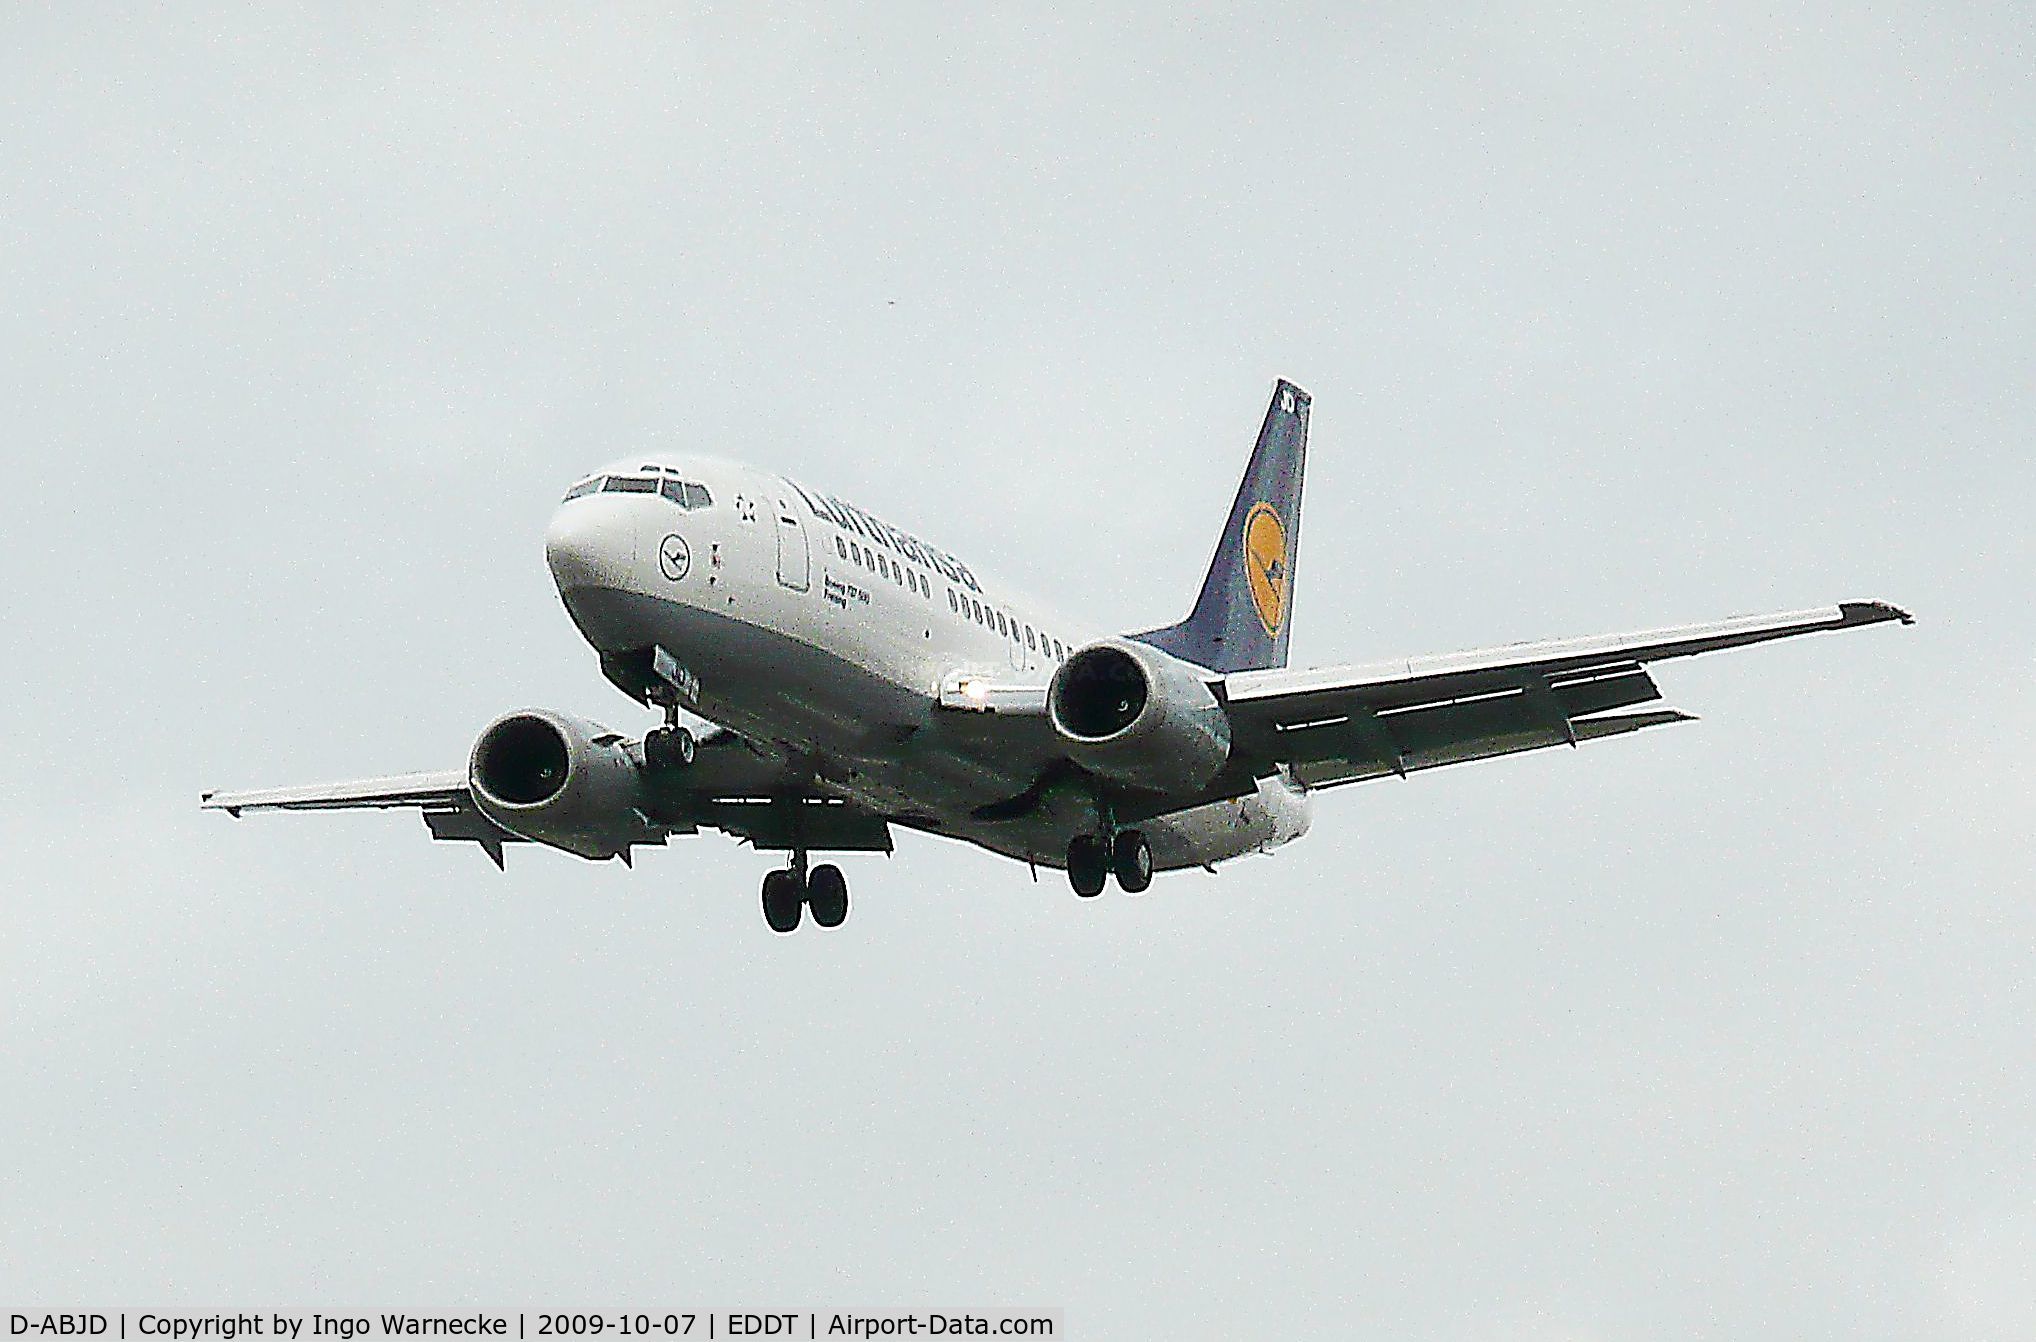 D-ABJD, 1991 Boeing 737-530 C/N 25309, Boeing 737-530 of Lufthansa on final approach into Tegel airport